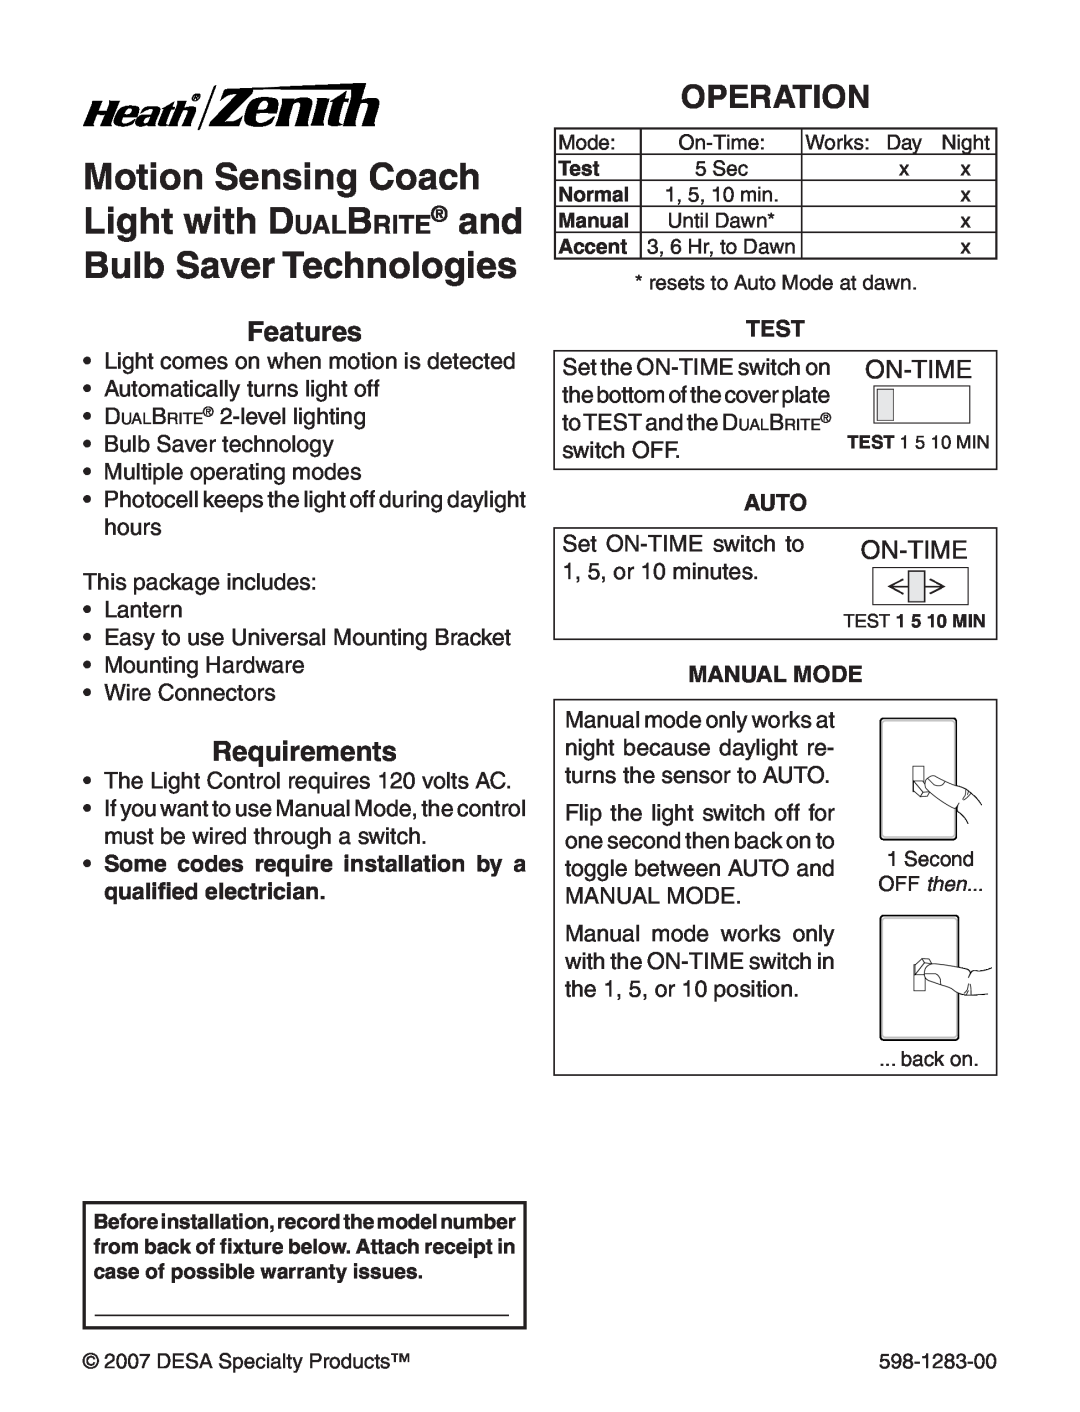 Heath Zenith 598-1283-00 warranty Motion Sensing Coach Light with DualBrite and Bulb Saver Technologies, Operation, Test 